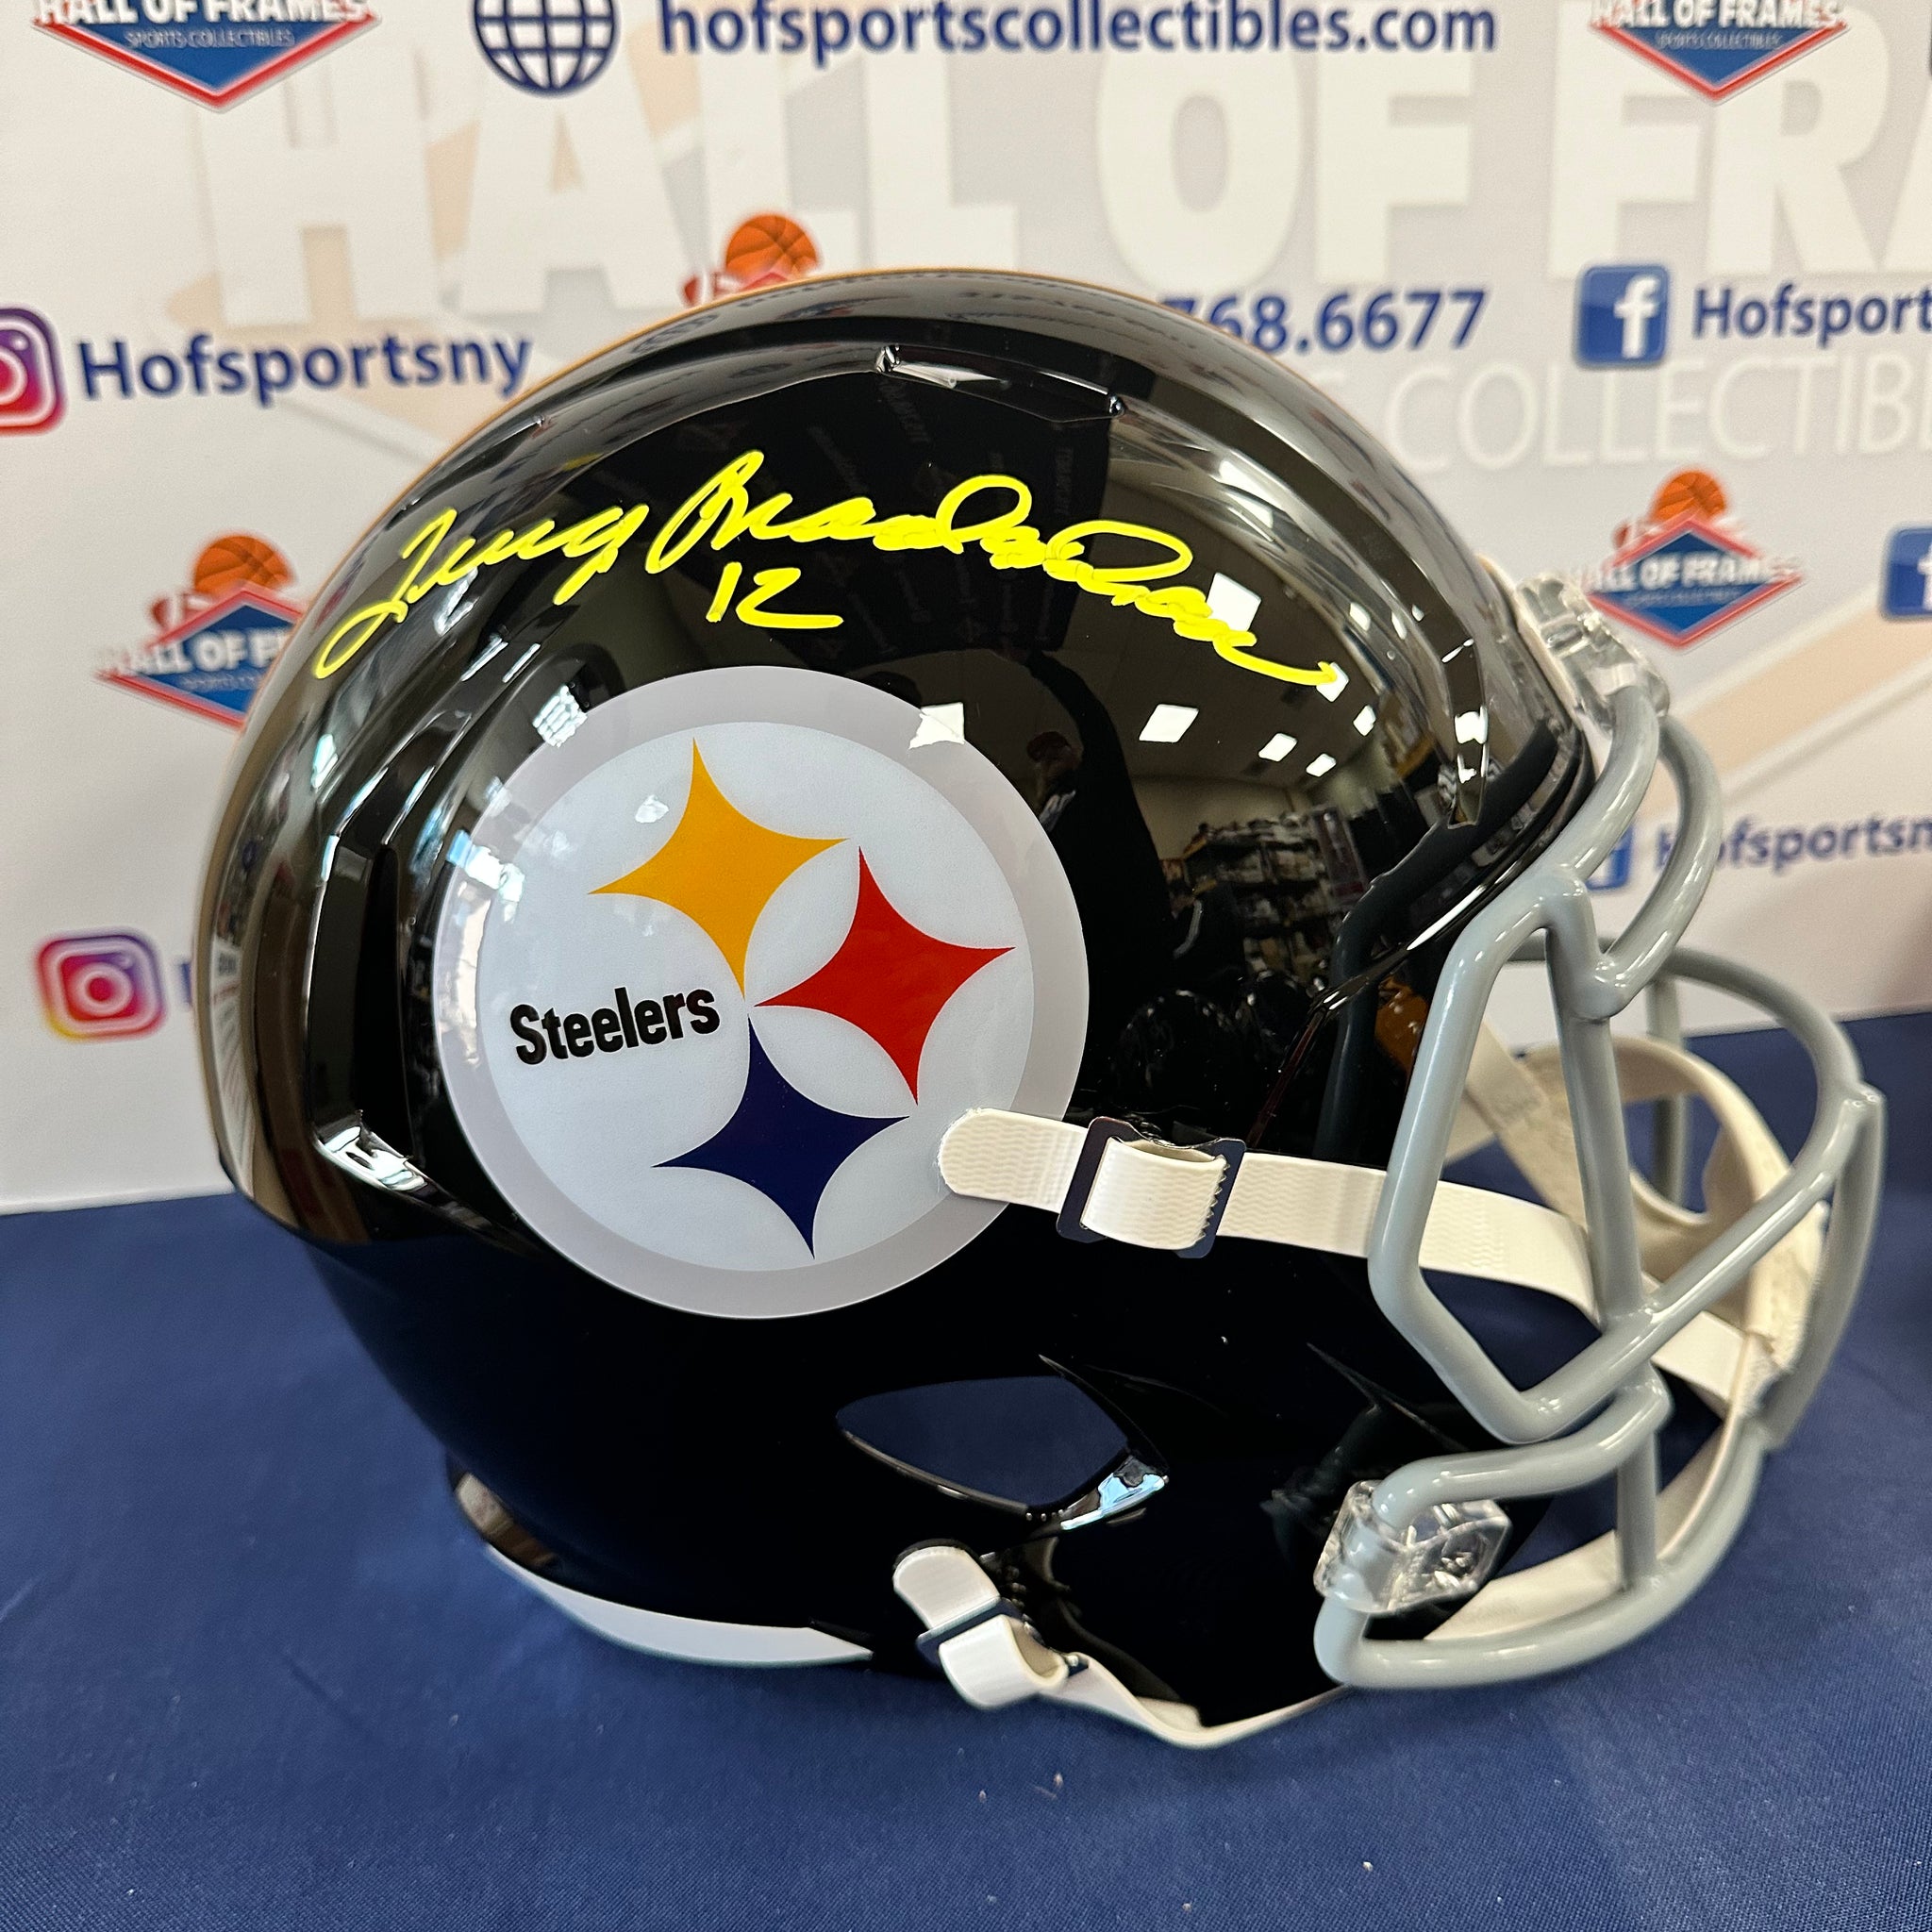 TERRY BRADSHAW PITTSBURGH STEELERS SIGNED F/S REPLICA HELMET! BAS AUTHENTIC!